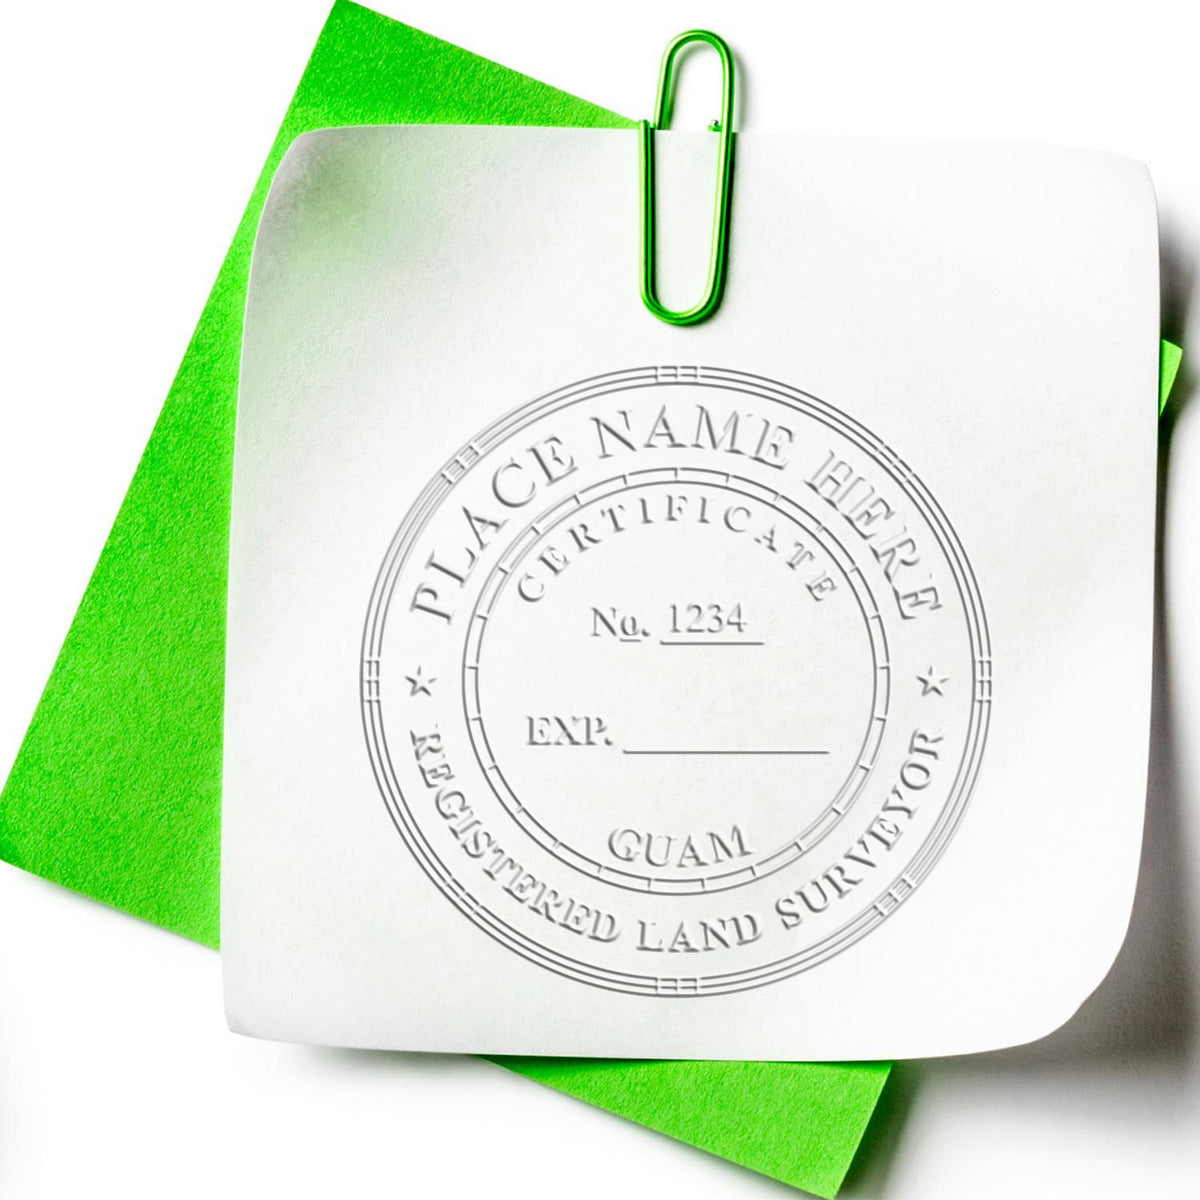 A photograph of the State of Guam Soft Land Surveyor Embossing Seal stamp impression reveals a vivid, professional image of the on paper.